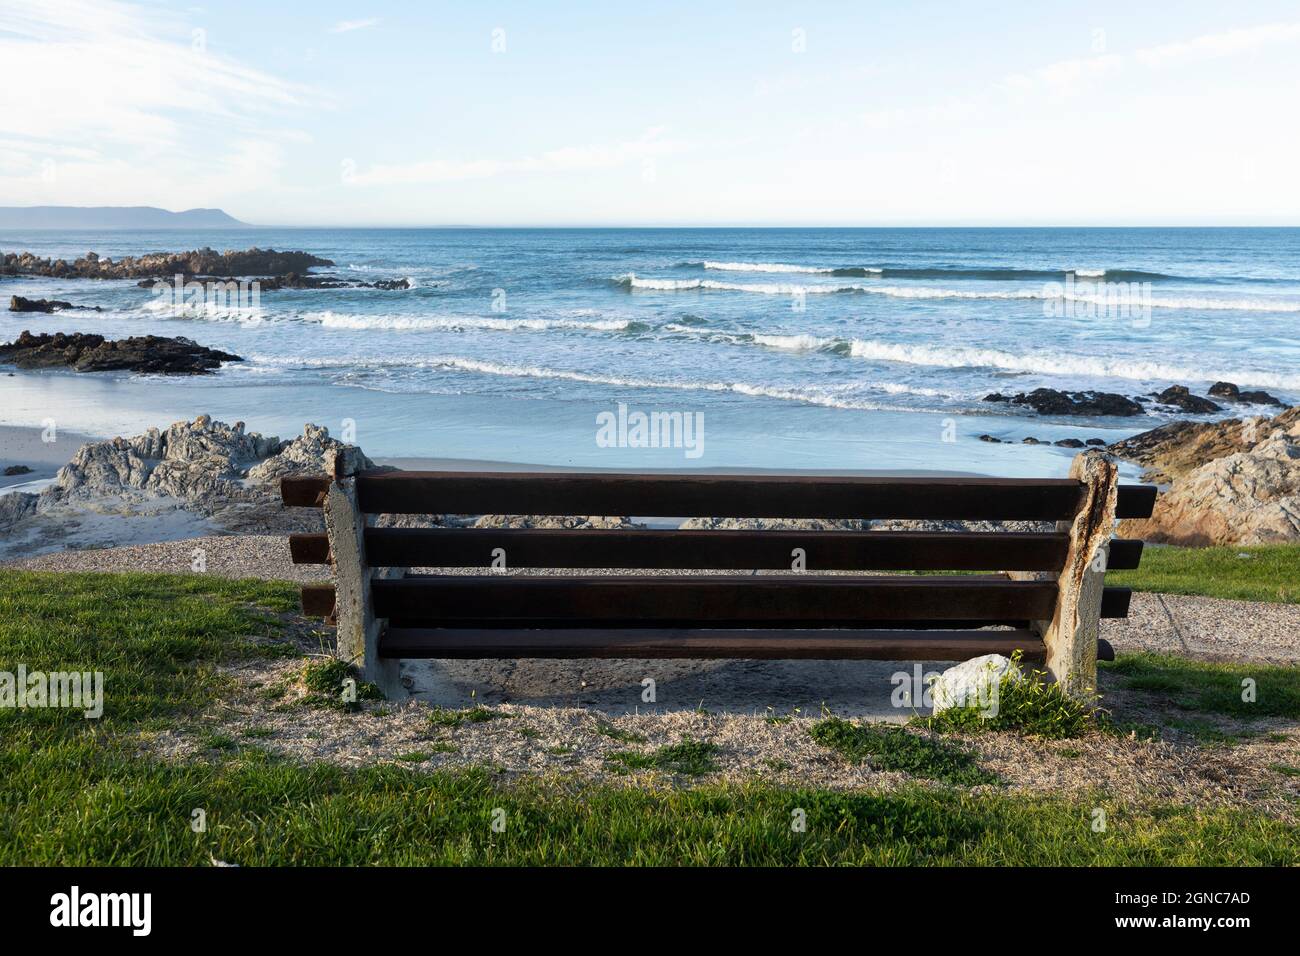 Bench overlooking a beach, jagged rocks and rockpools on the Atlantic coast. Stock Photo